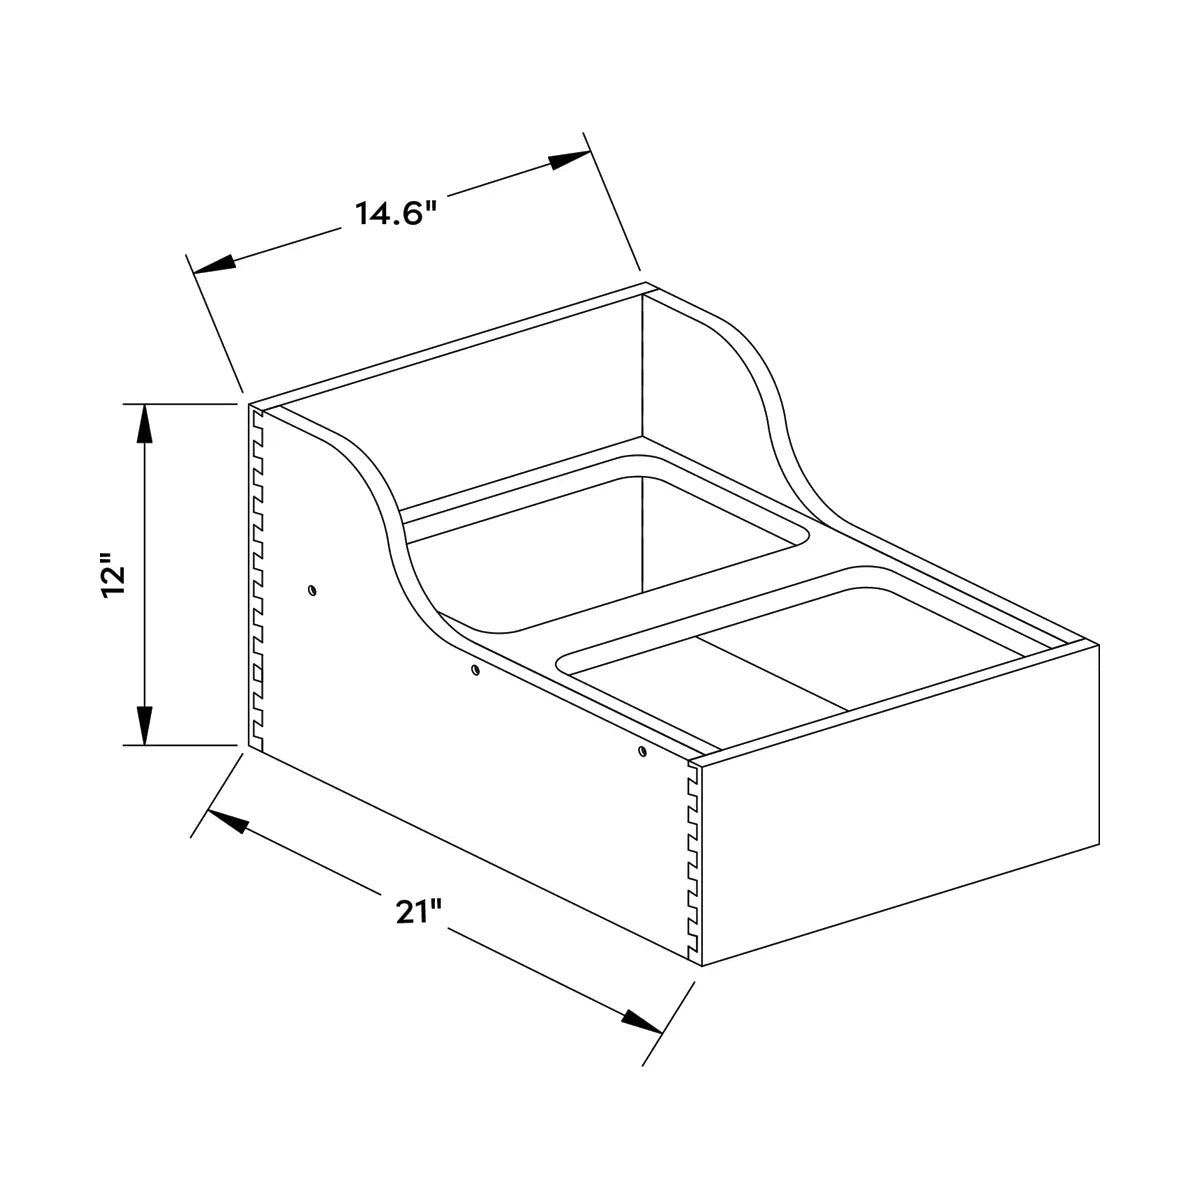 Craft Cabinetry Shaker White Trash Can Holder Image Specifications